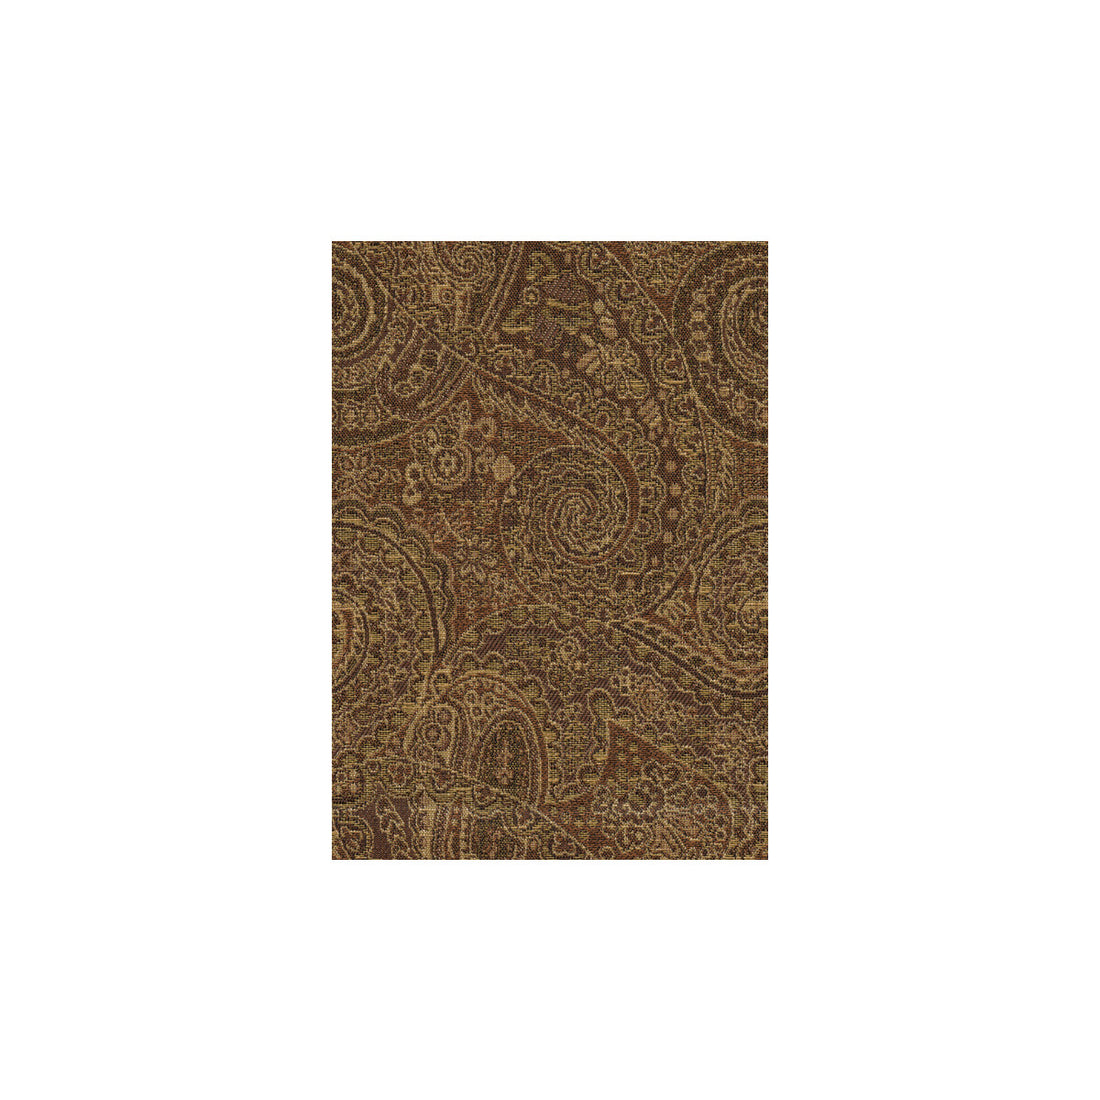 Kasan fabric in java color - pattern 31524.6.0 - by Kravet Contract in the Gis Crypton collection